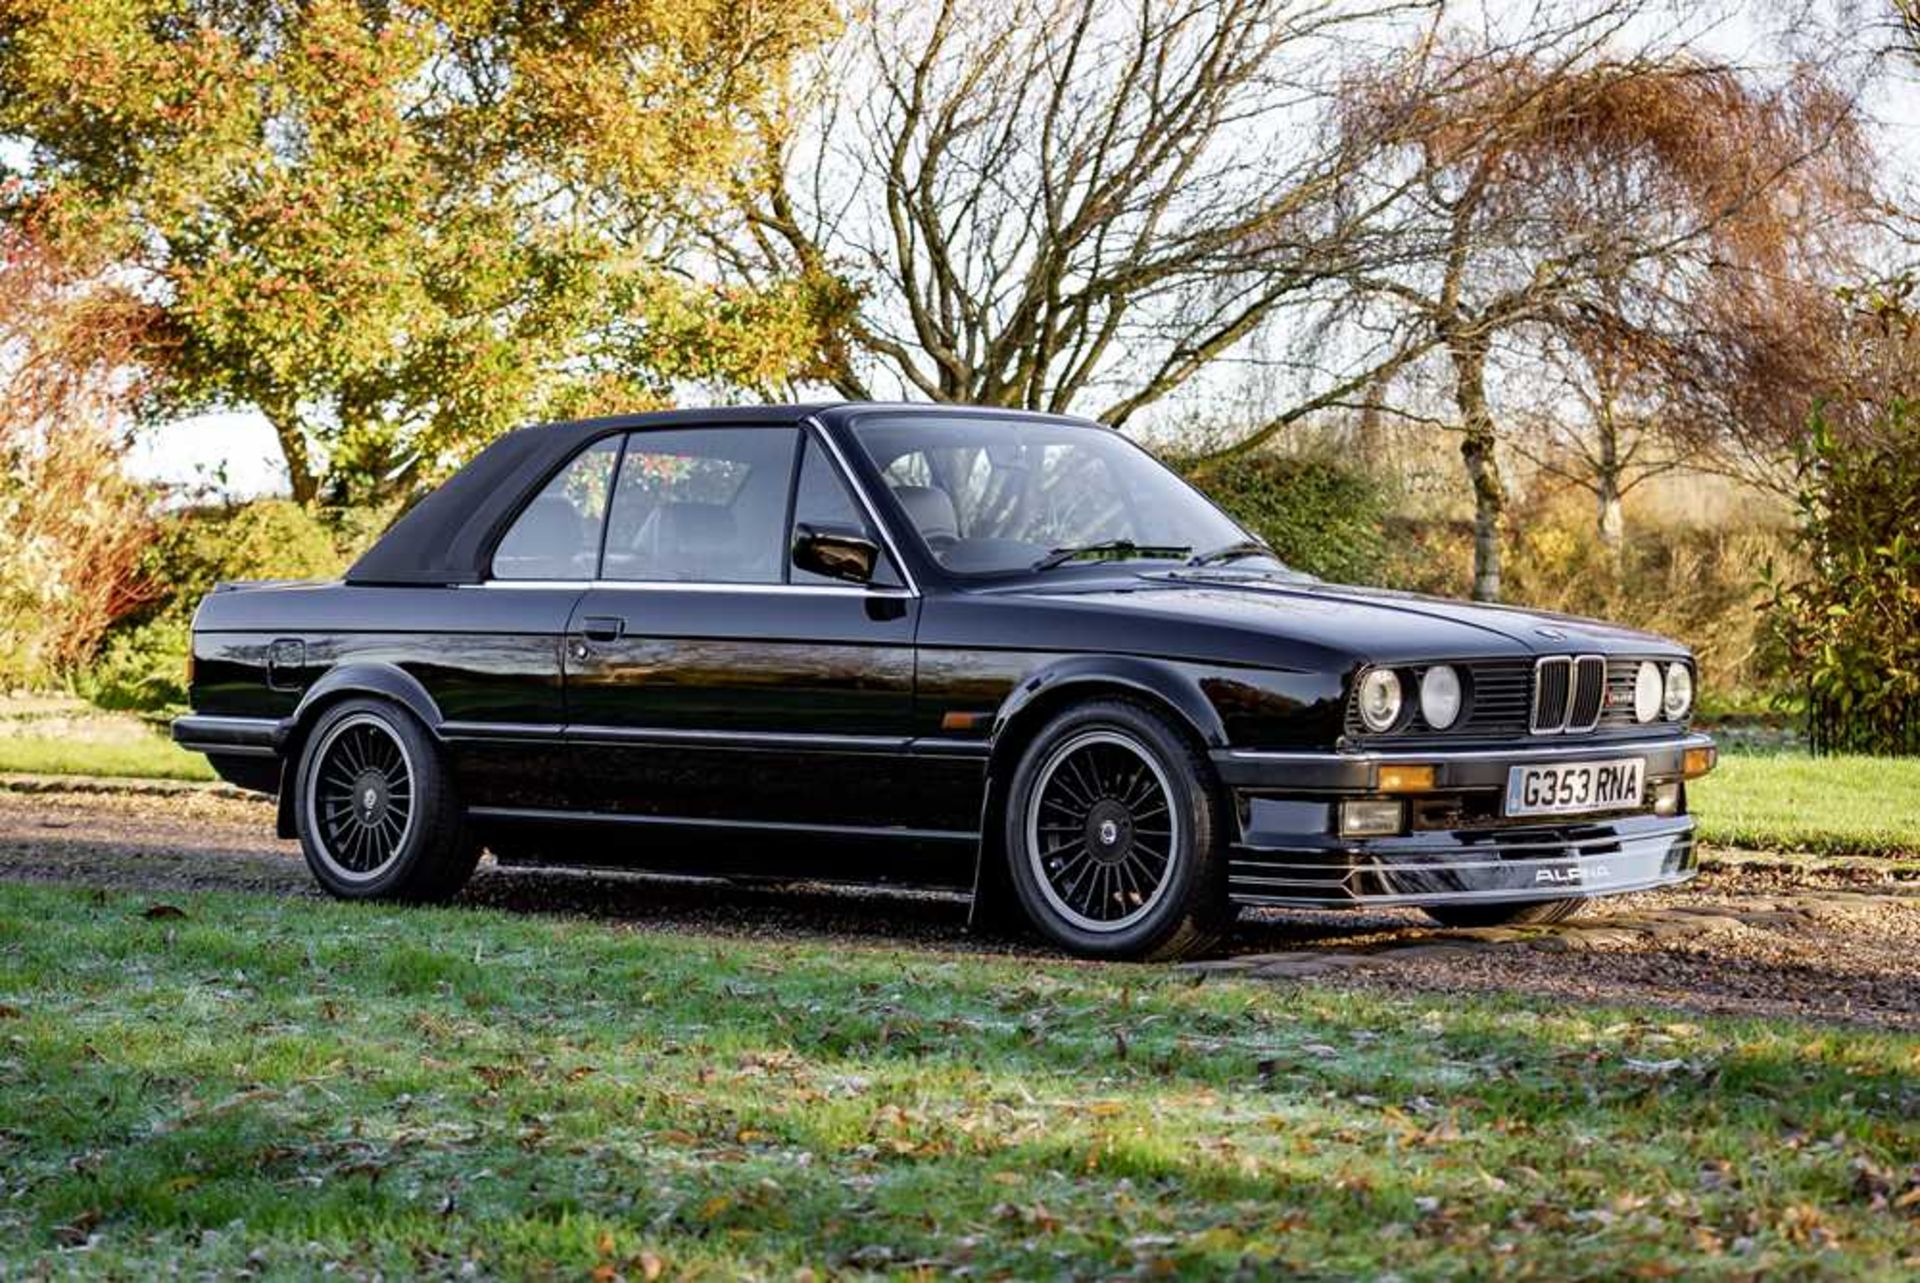 1989 BMW 320i Convertible Converted to Alpina 328i Specification - Image 2 of 51